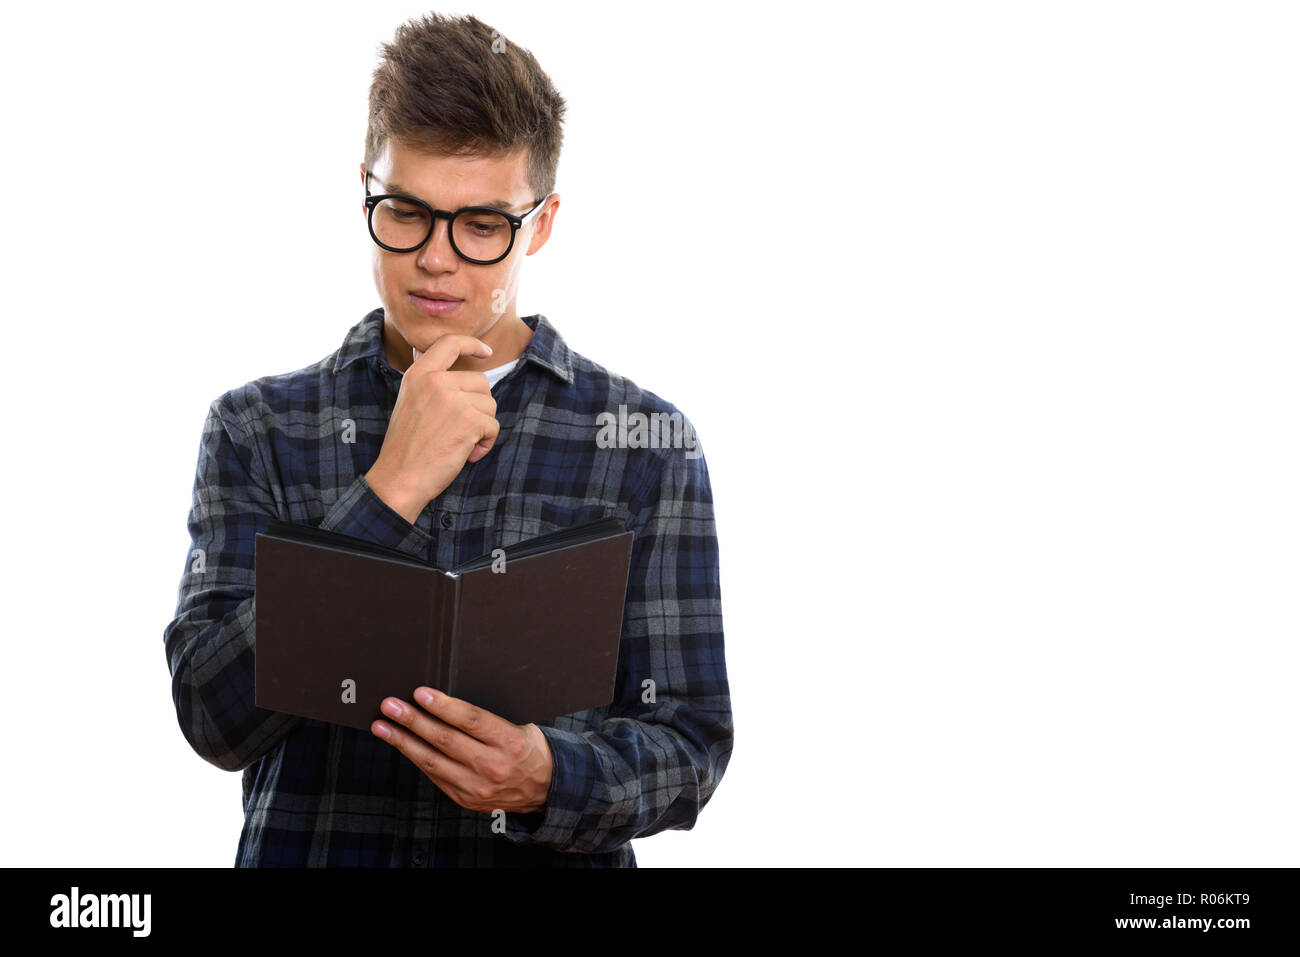 Studio shot of young handsome man reading book while thinking Stock Photo